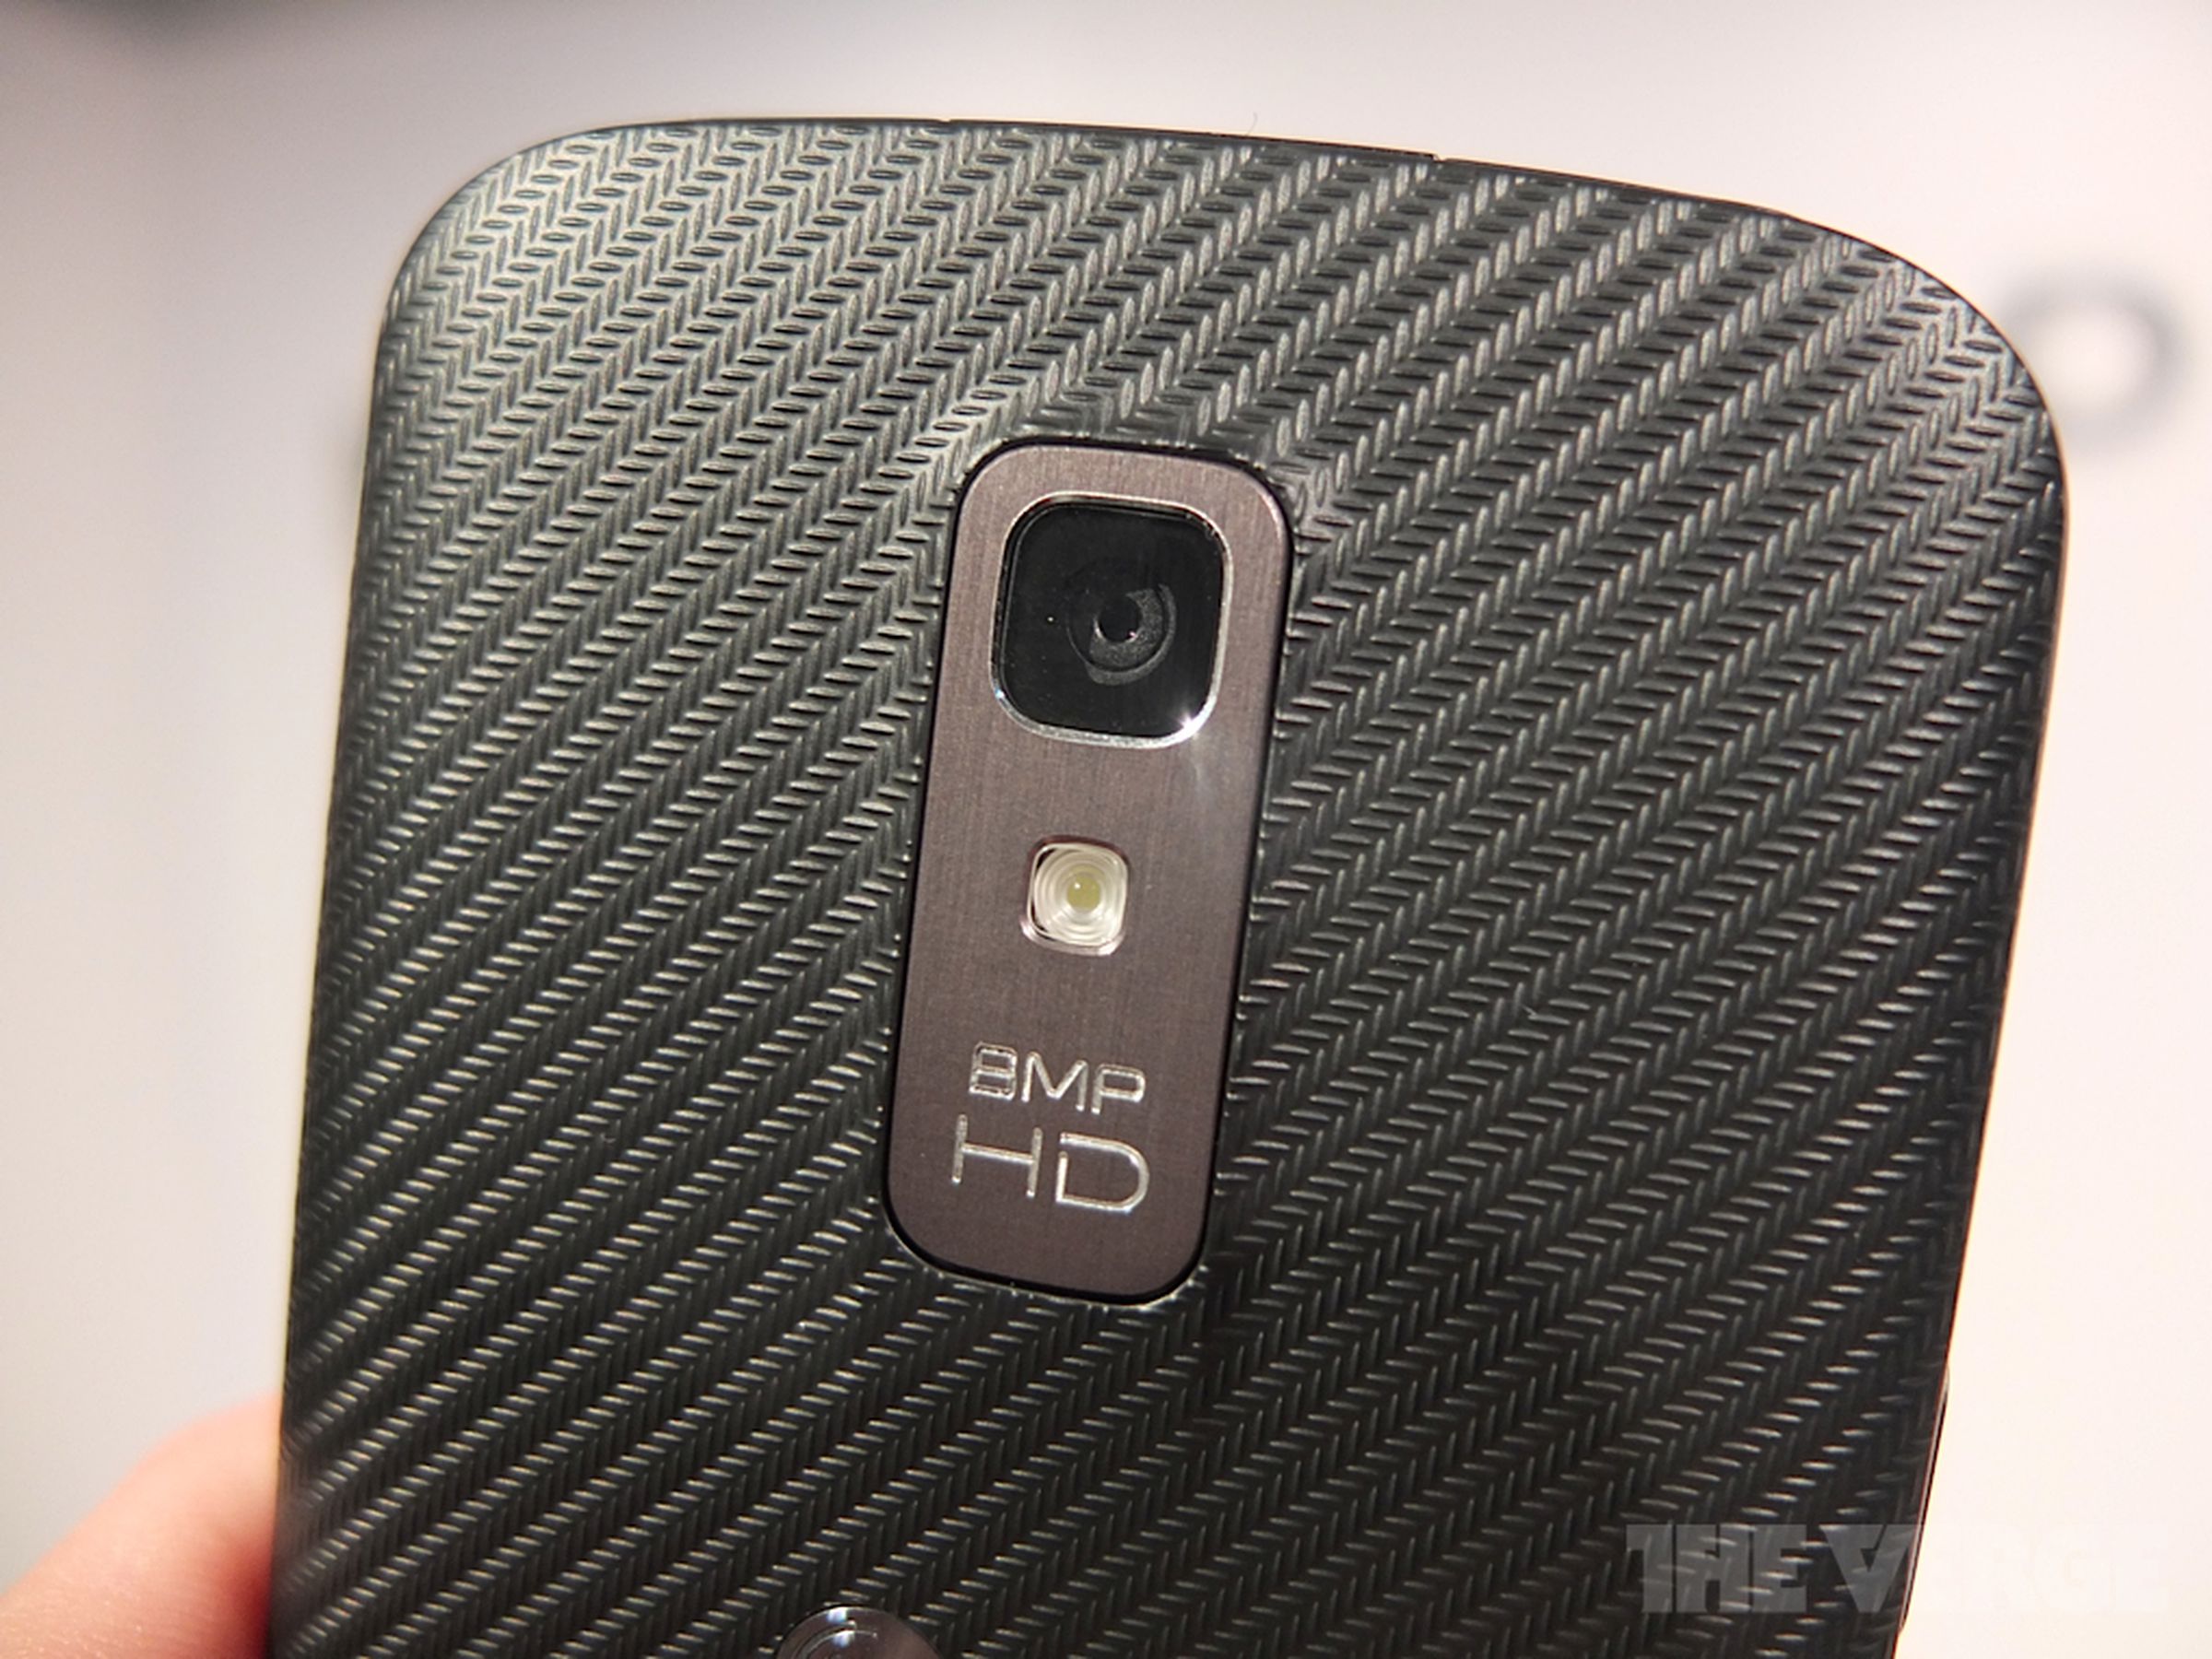 LG Nitro HD hands-on pictures